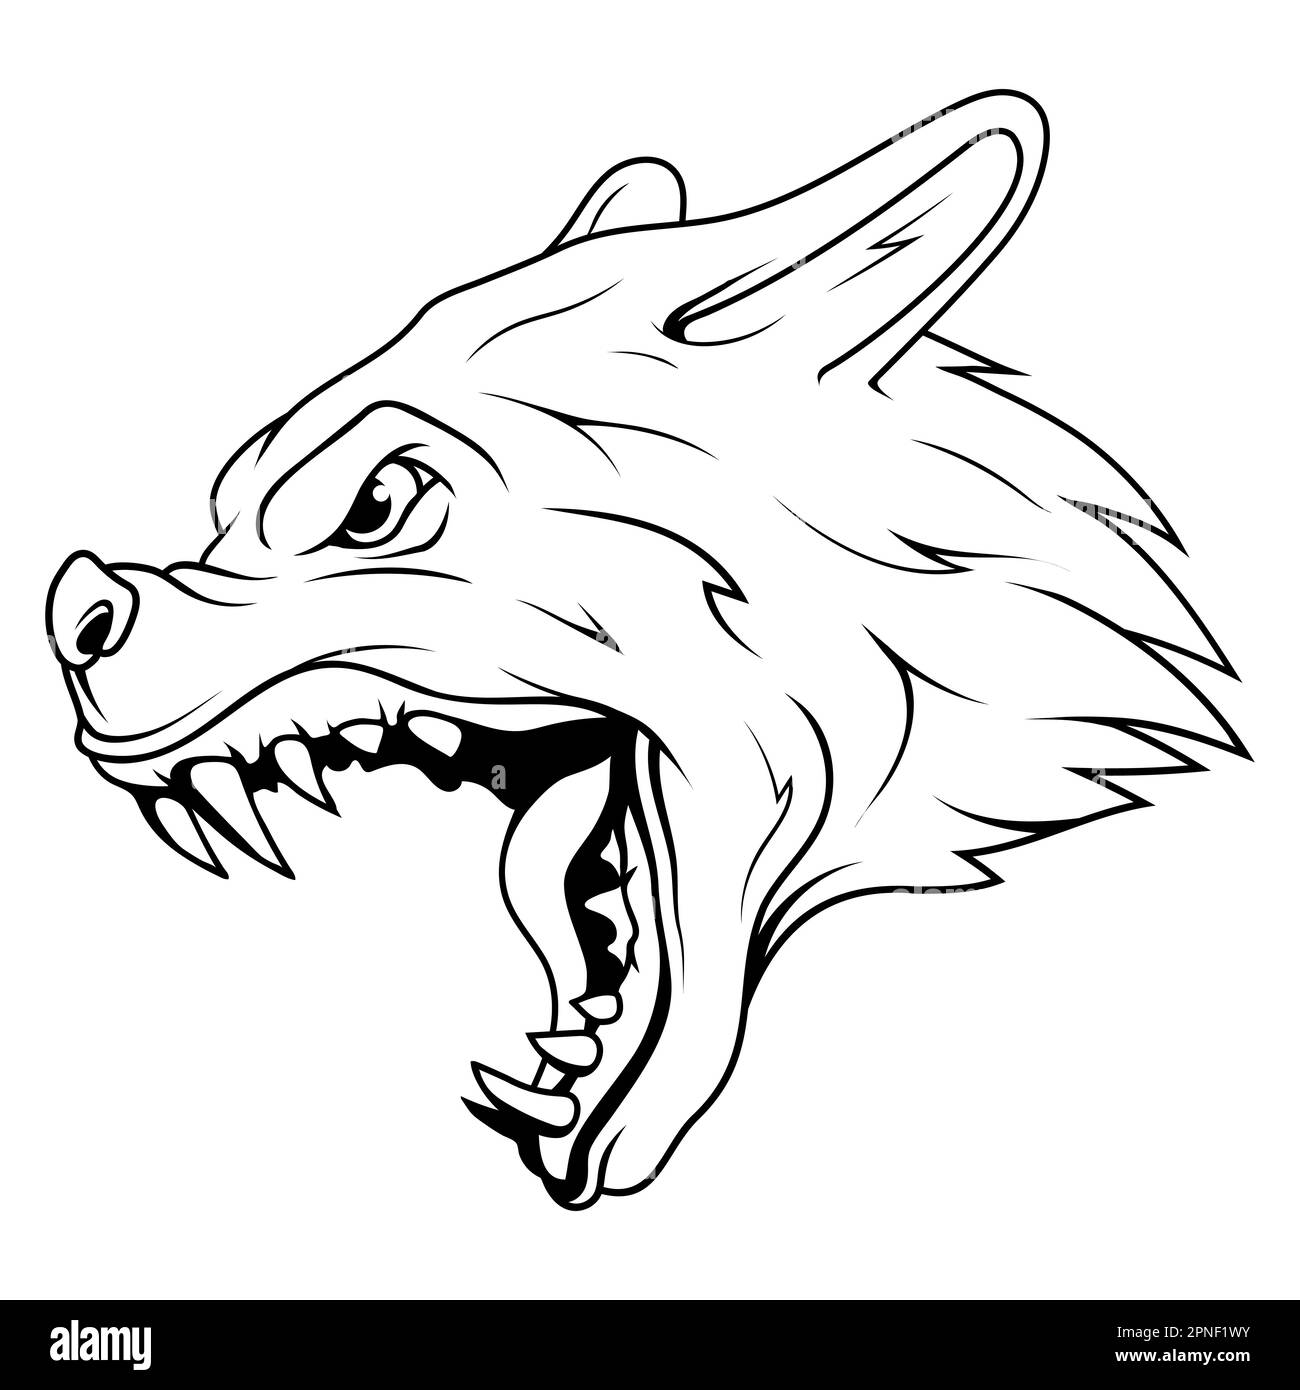 Wolf. Vector illustration of an angry animal. Sketch dog for t-shirt ...